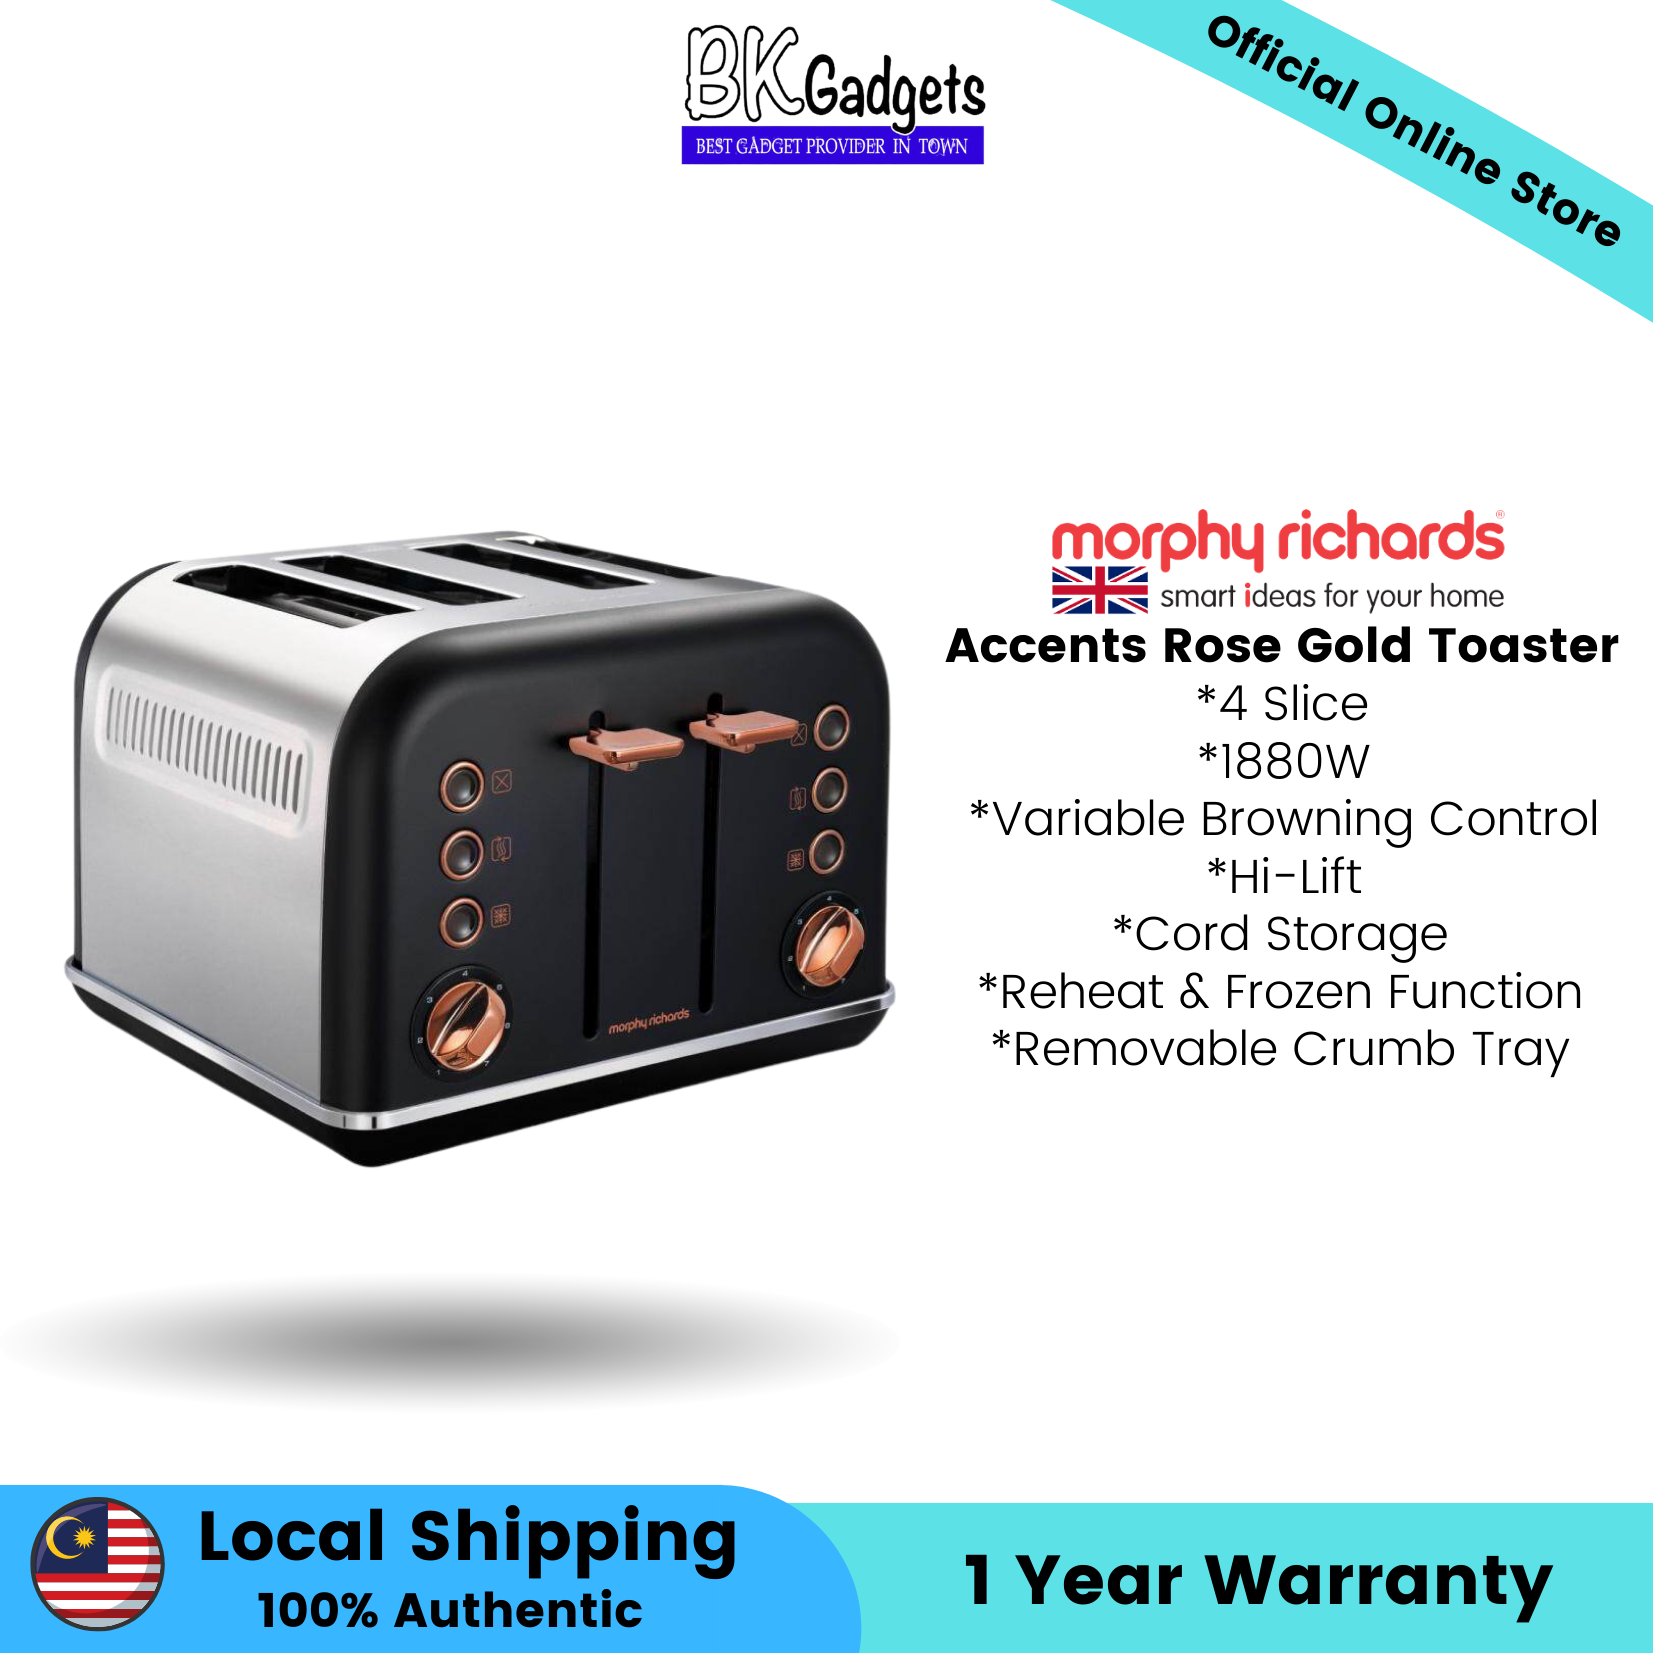 Morphy Richards Accents Rose Gold Toaster Black - 4 Slice | Cord Storage | Removable Crumb Tray